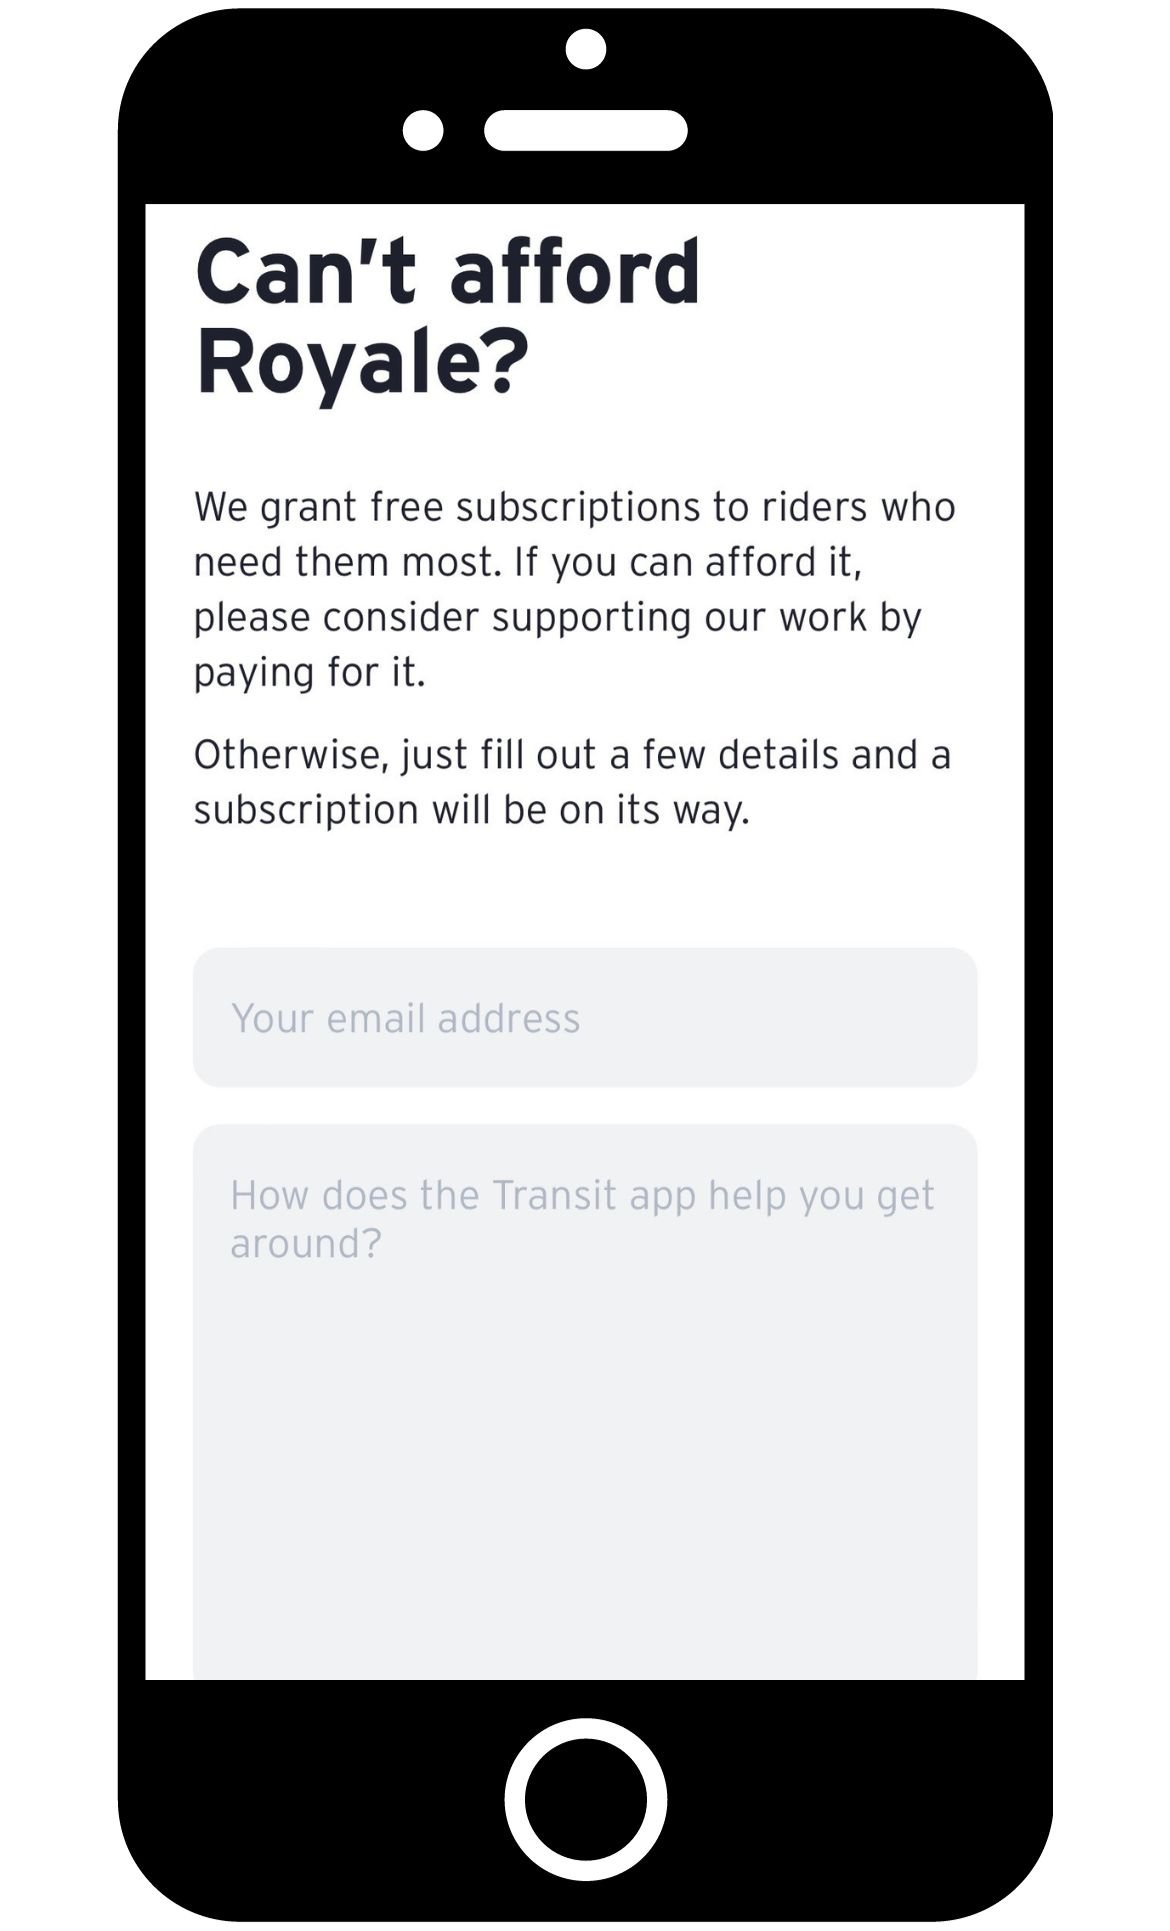 Click “Upgrade to Royale,” scroll down to Can’t afford it? and click the “Learn more” button. Here you will encounter Transit’s explanation for why they're requiring a paid subscription to access certain features. They say they are “offering a limited number of free subscriptions” by clicking “just send us an email and ask” you are brought 